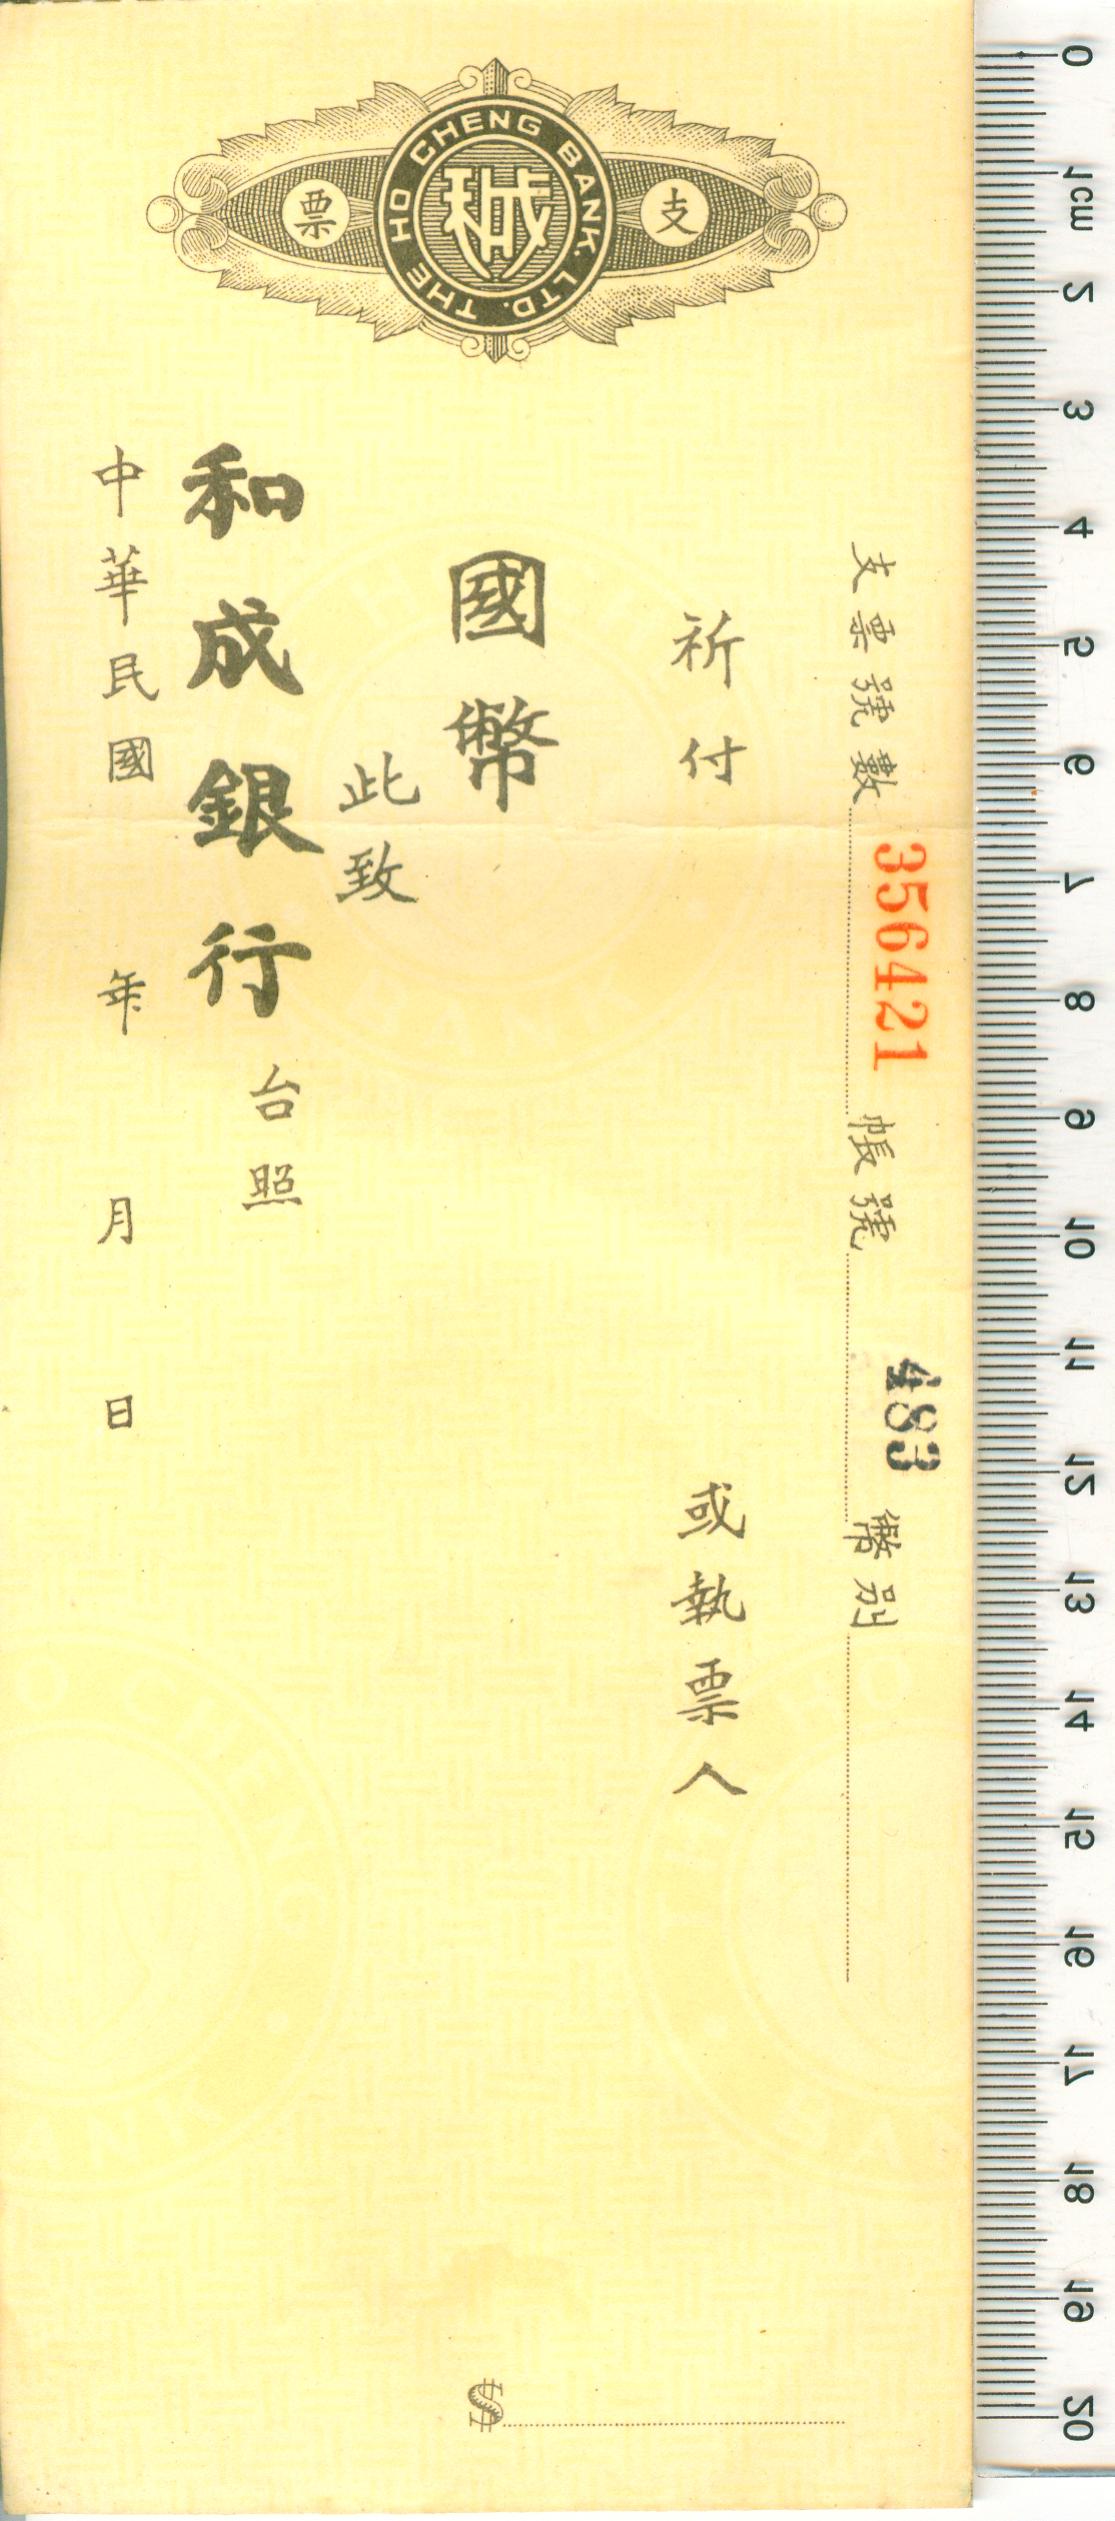 D2250，Checque of Ho Cheng Bank, 1940's, China, Unissued